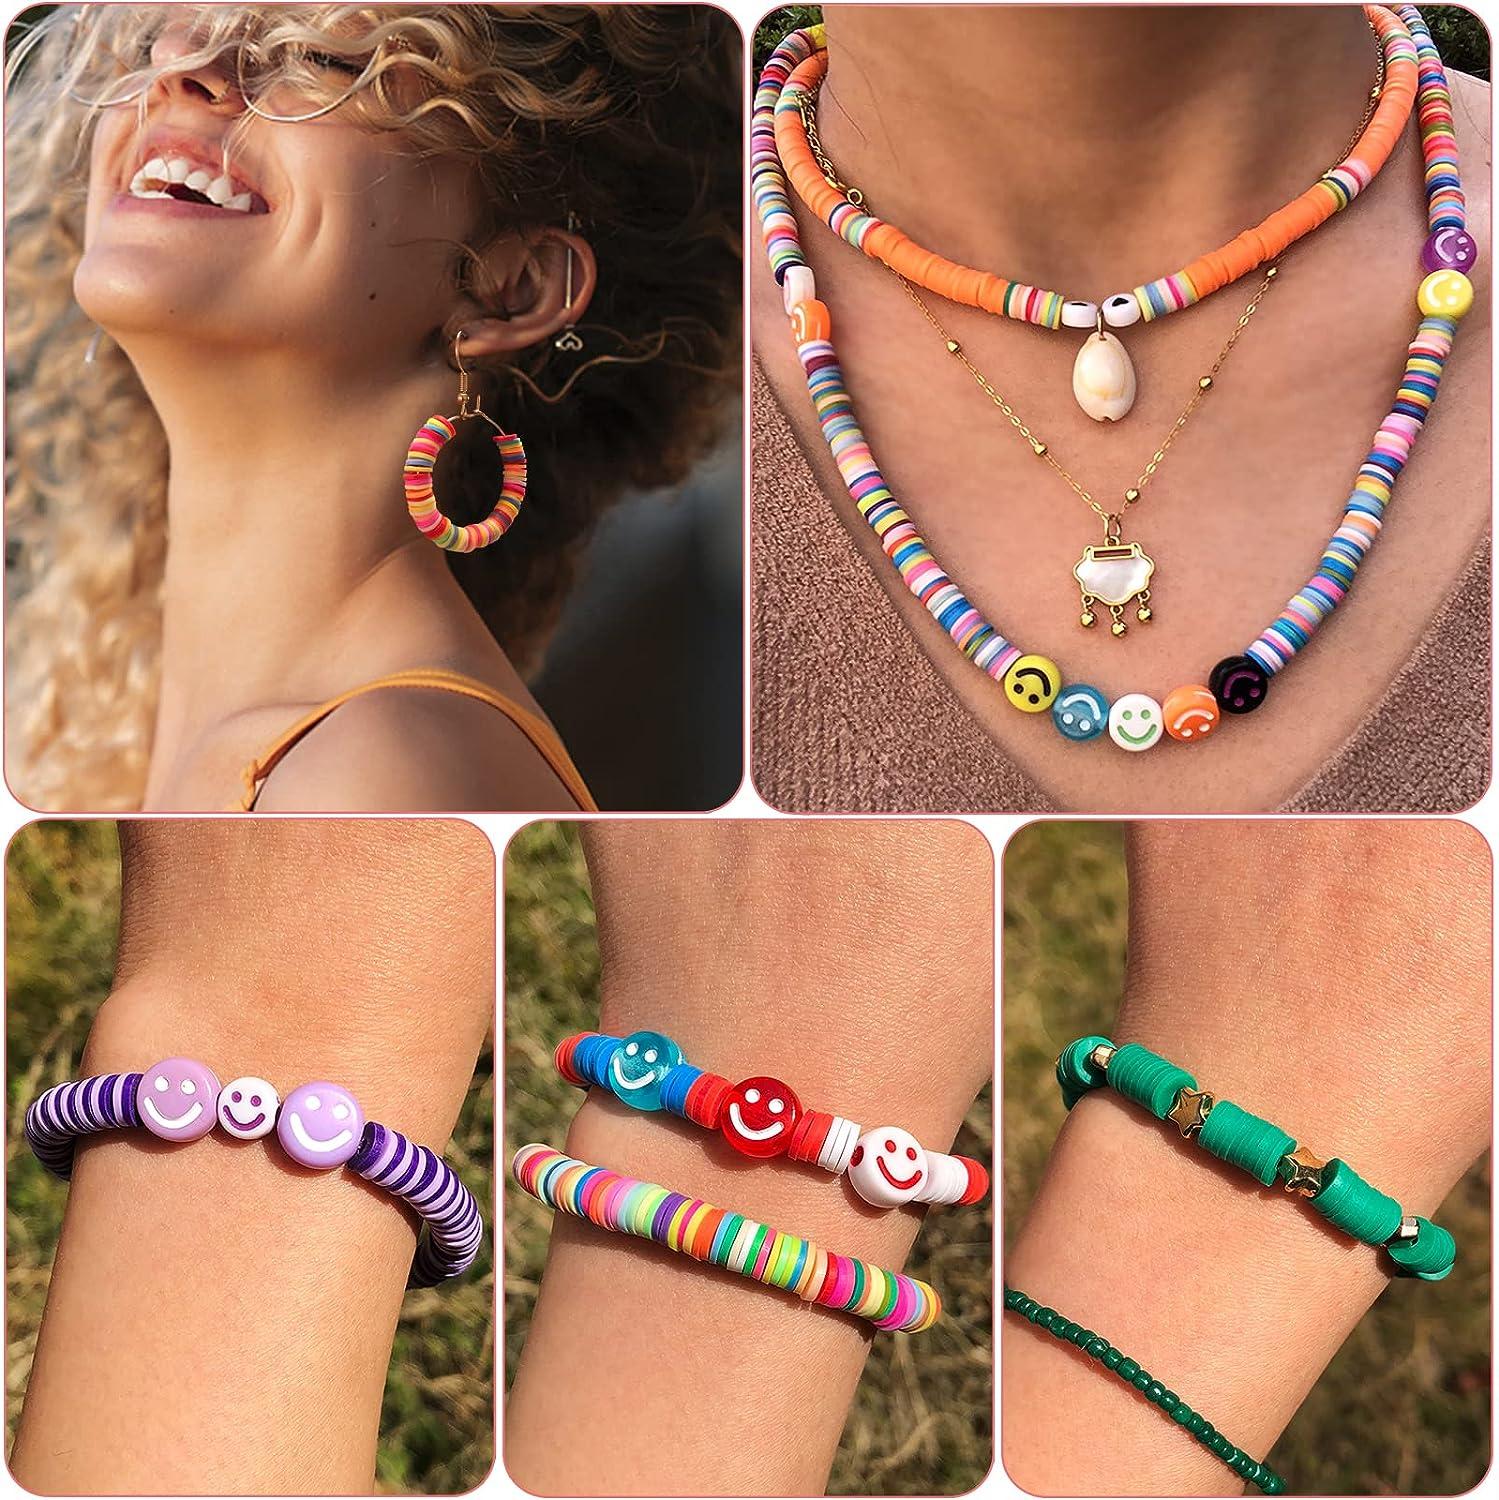 6mm Colorful Clay Beads Charms & Elastic Strings - DIY Bracelet Making Kit  Perfect for Crafting Unique Jewelry